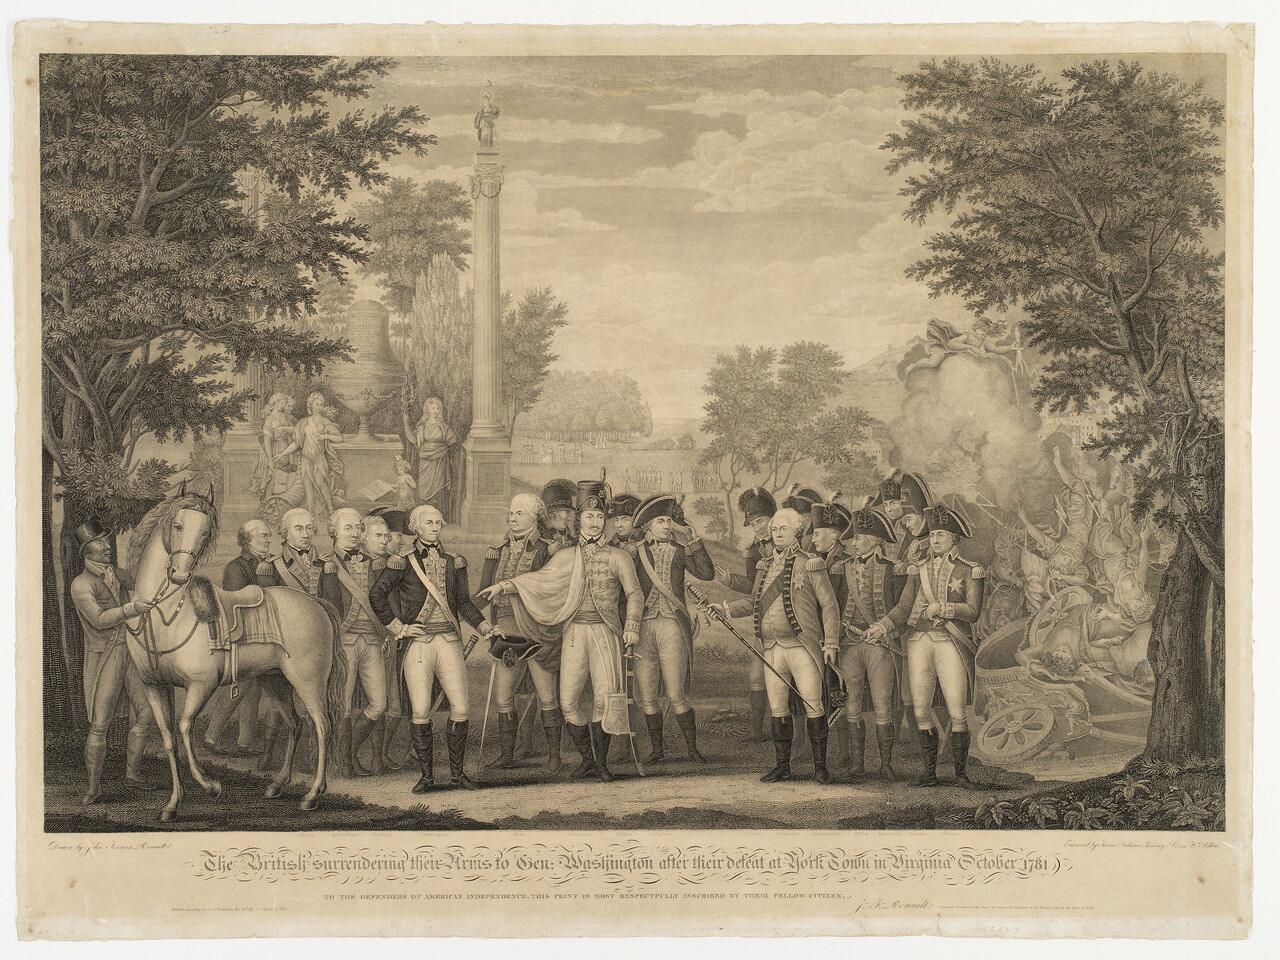 Tanner, Vallance, Kearny & Co. and William Allen The British surrendering their Arms to Gen: Washington...at York Town